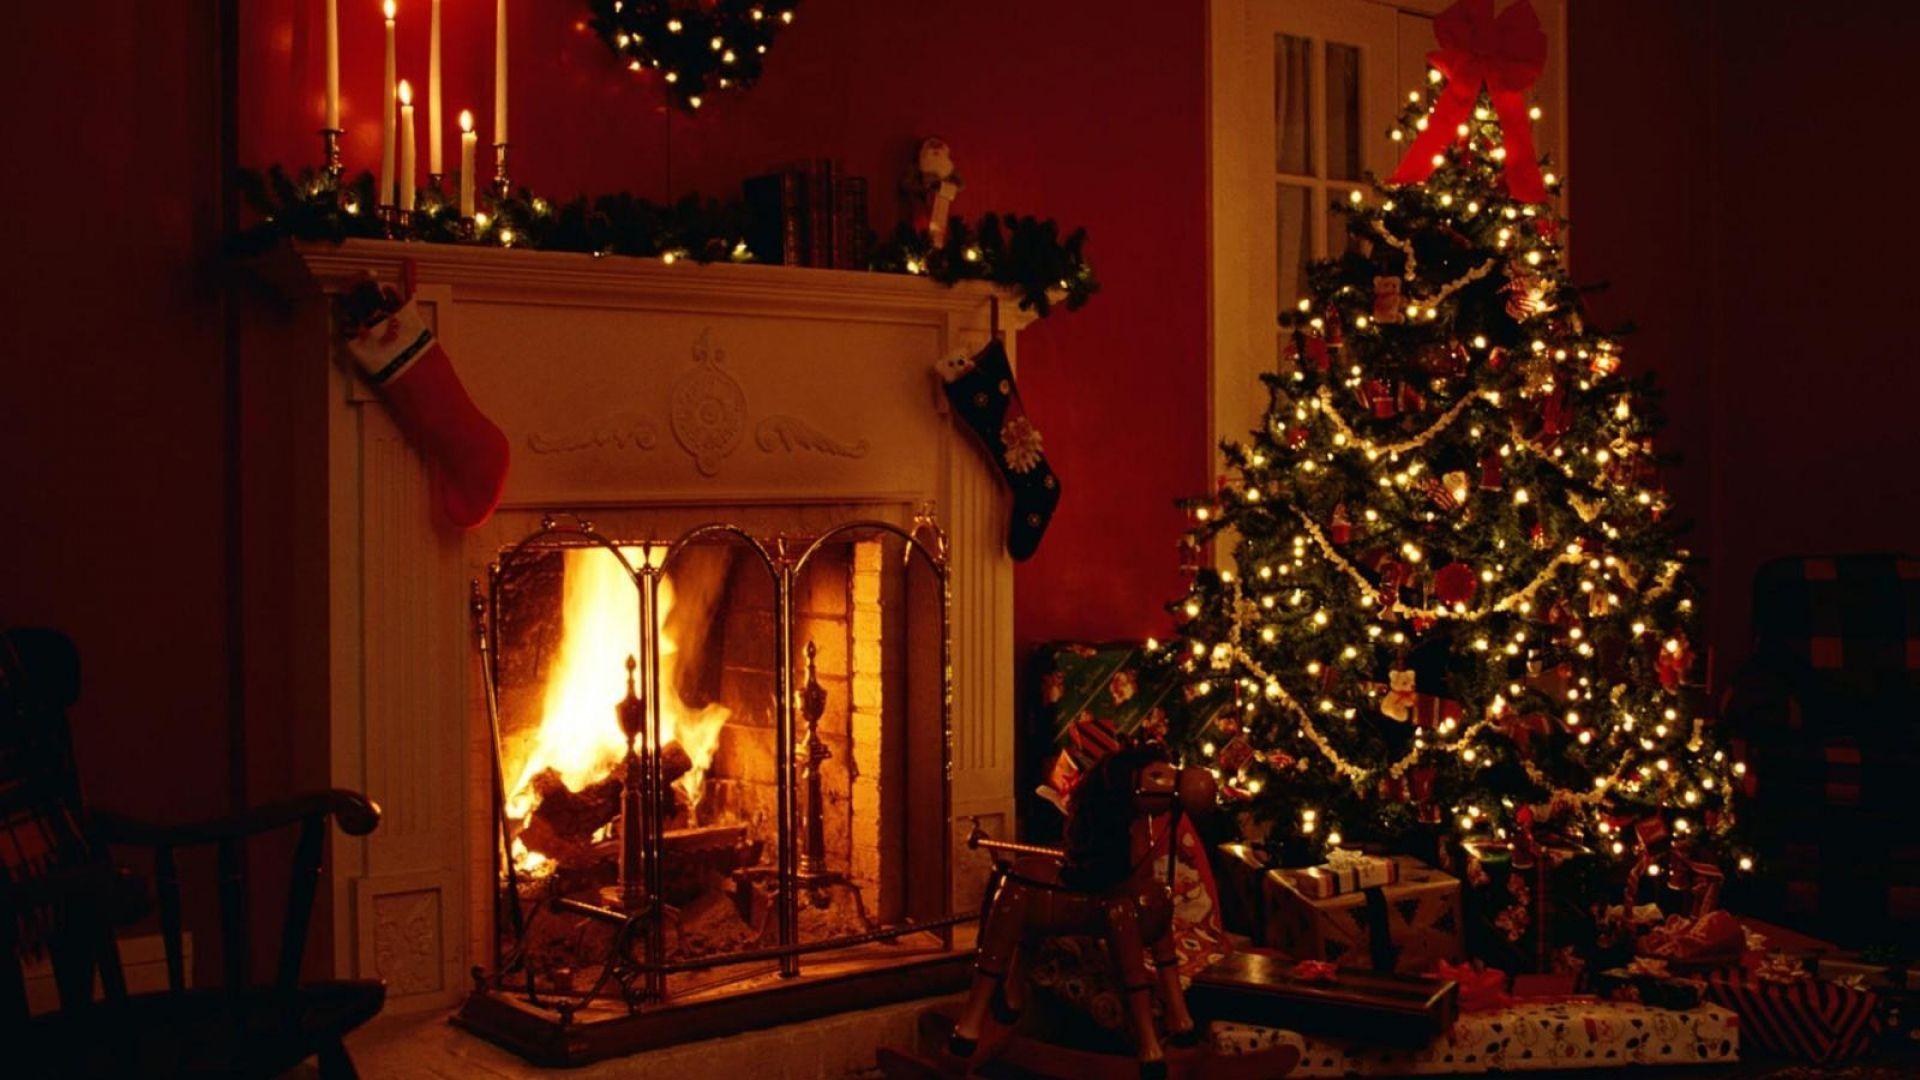 image For > Fireplace Wallpaper 1920x1080